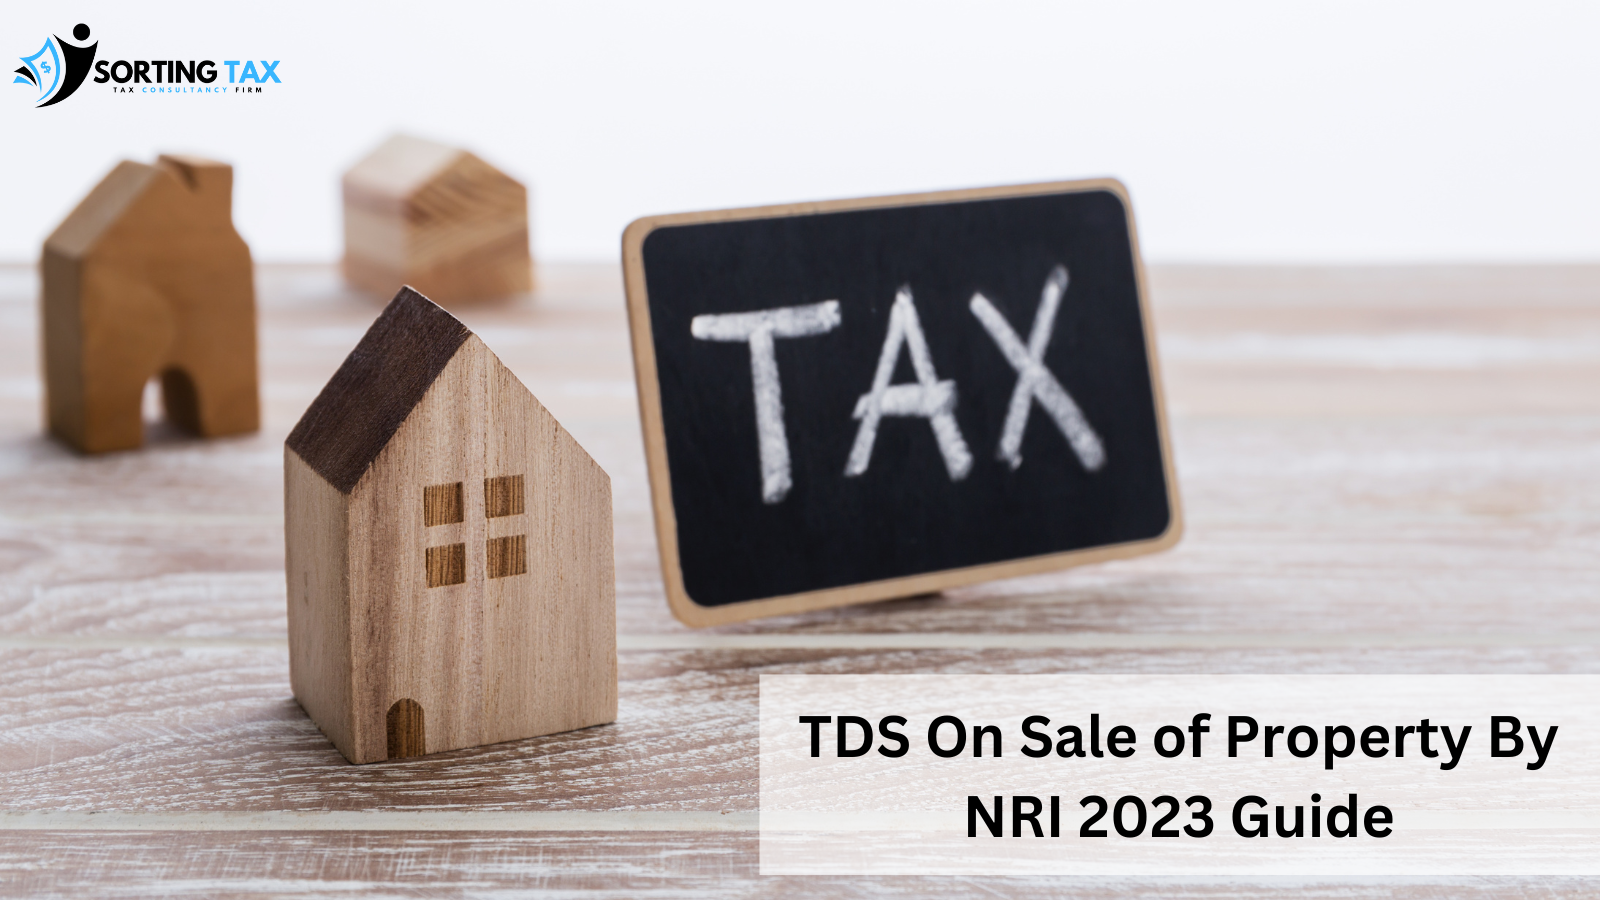 TDS On Sale of Property by NRI 2023 Guide Banner Image